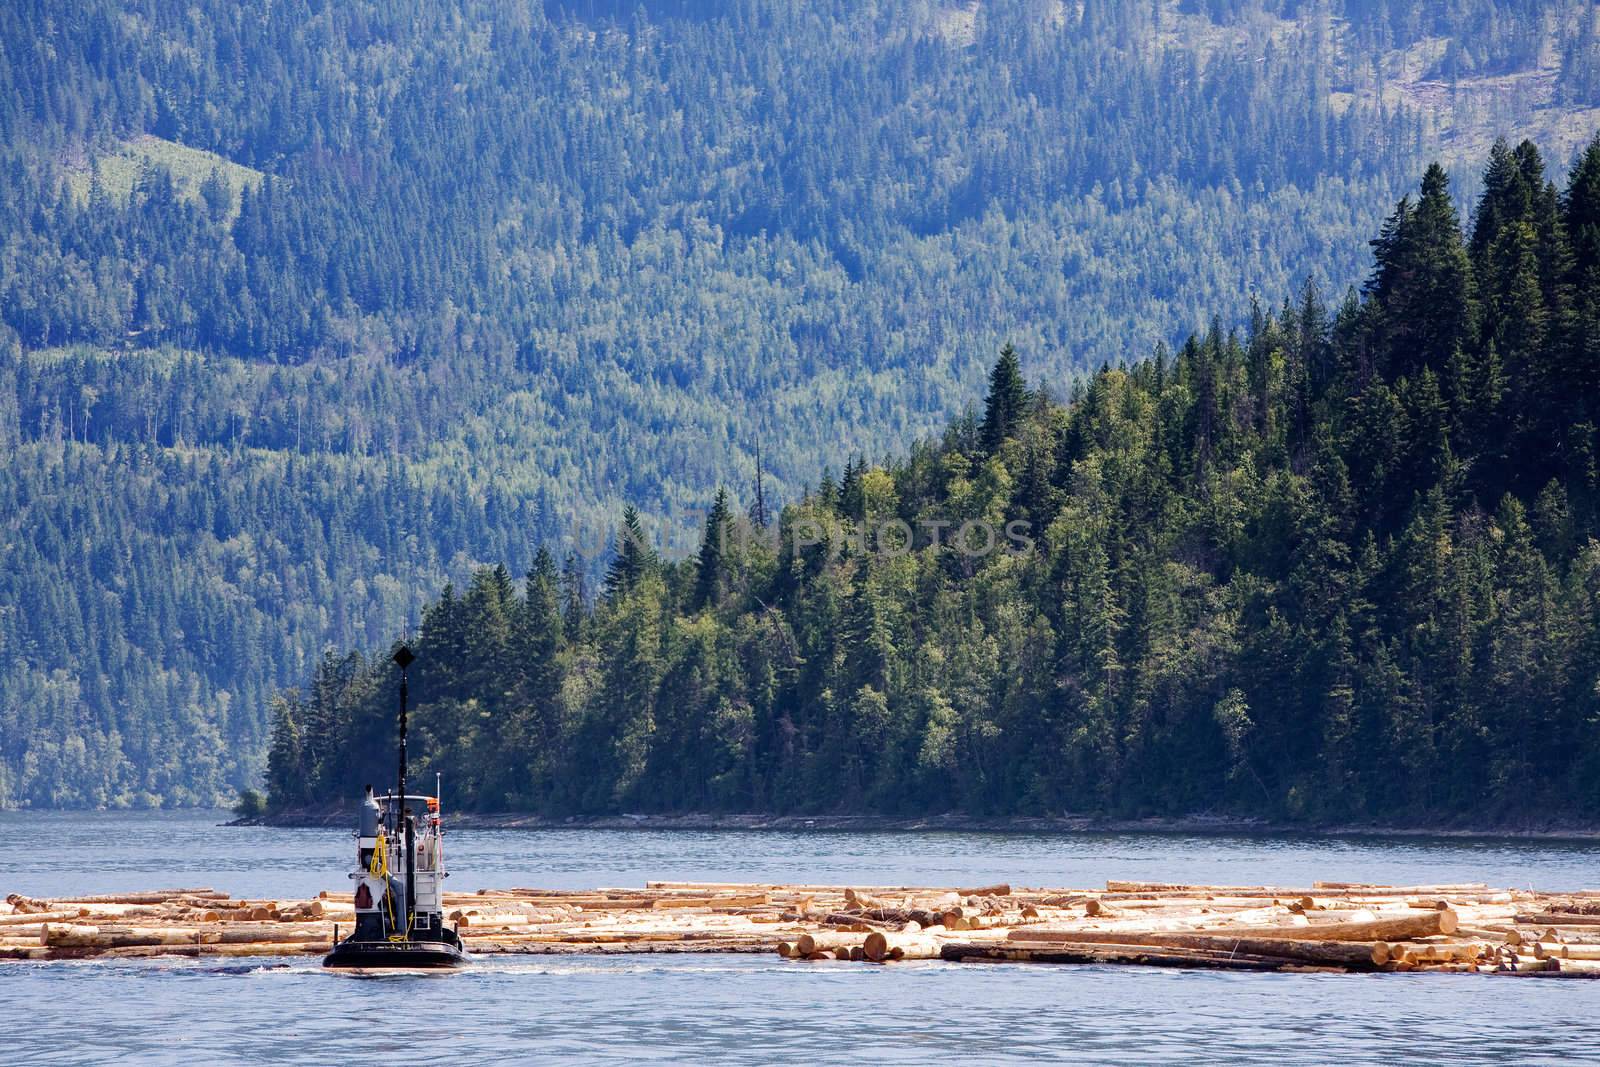 A logging boat on the coast